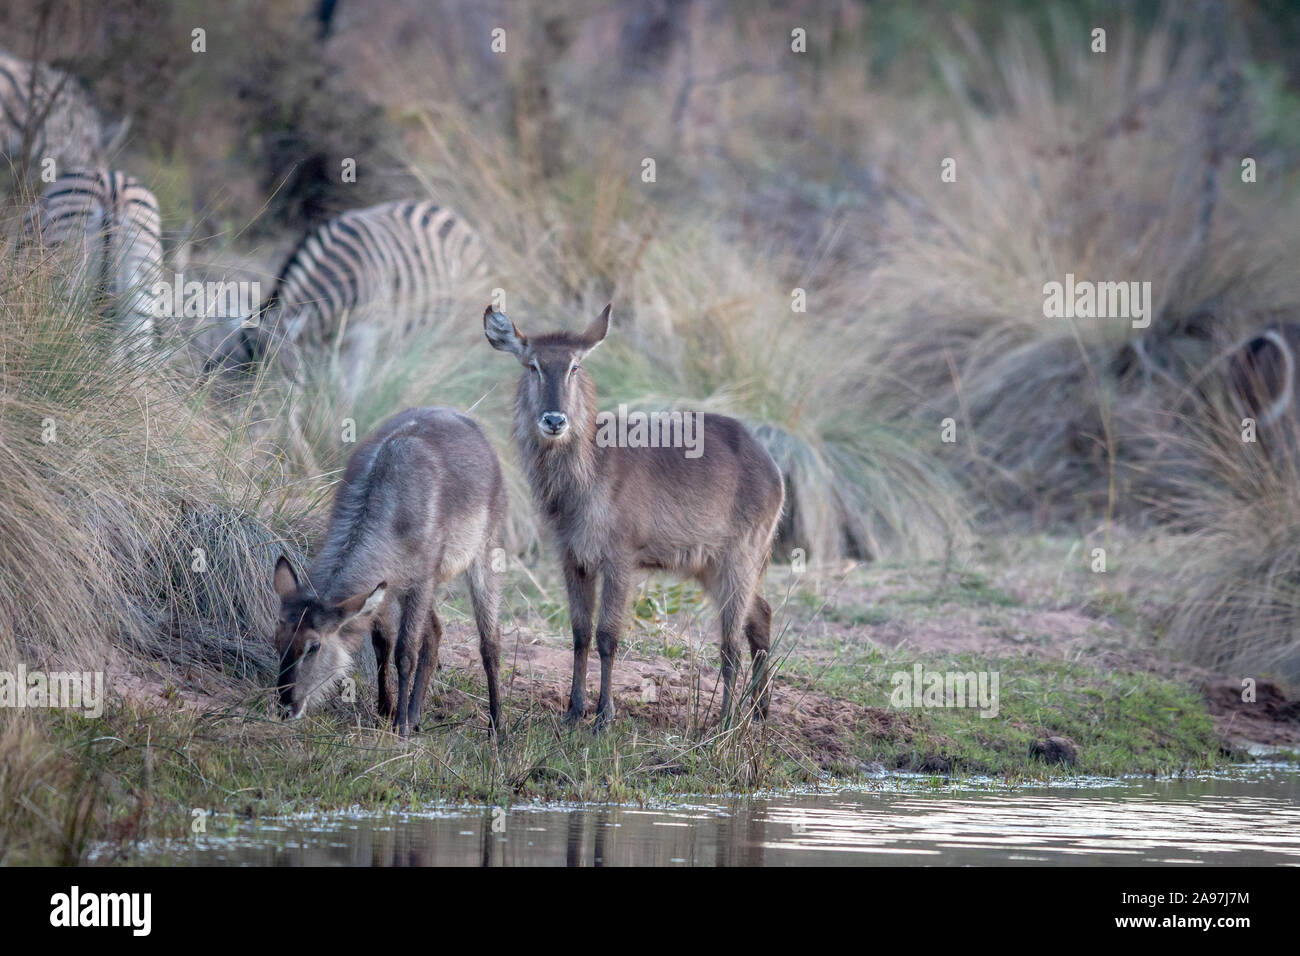 Waterbuck starring at the camera in the Welgevonden game reserve, South Africa. Stock Photo